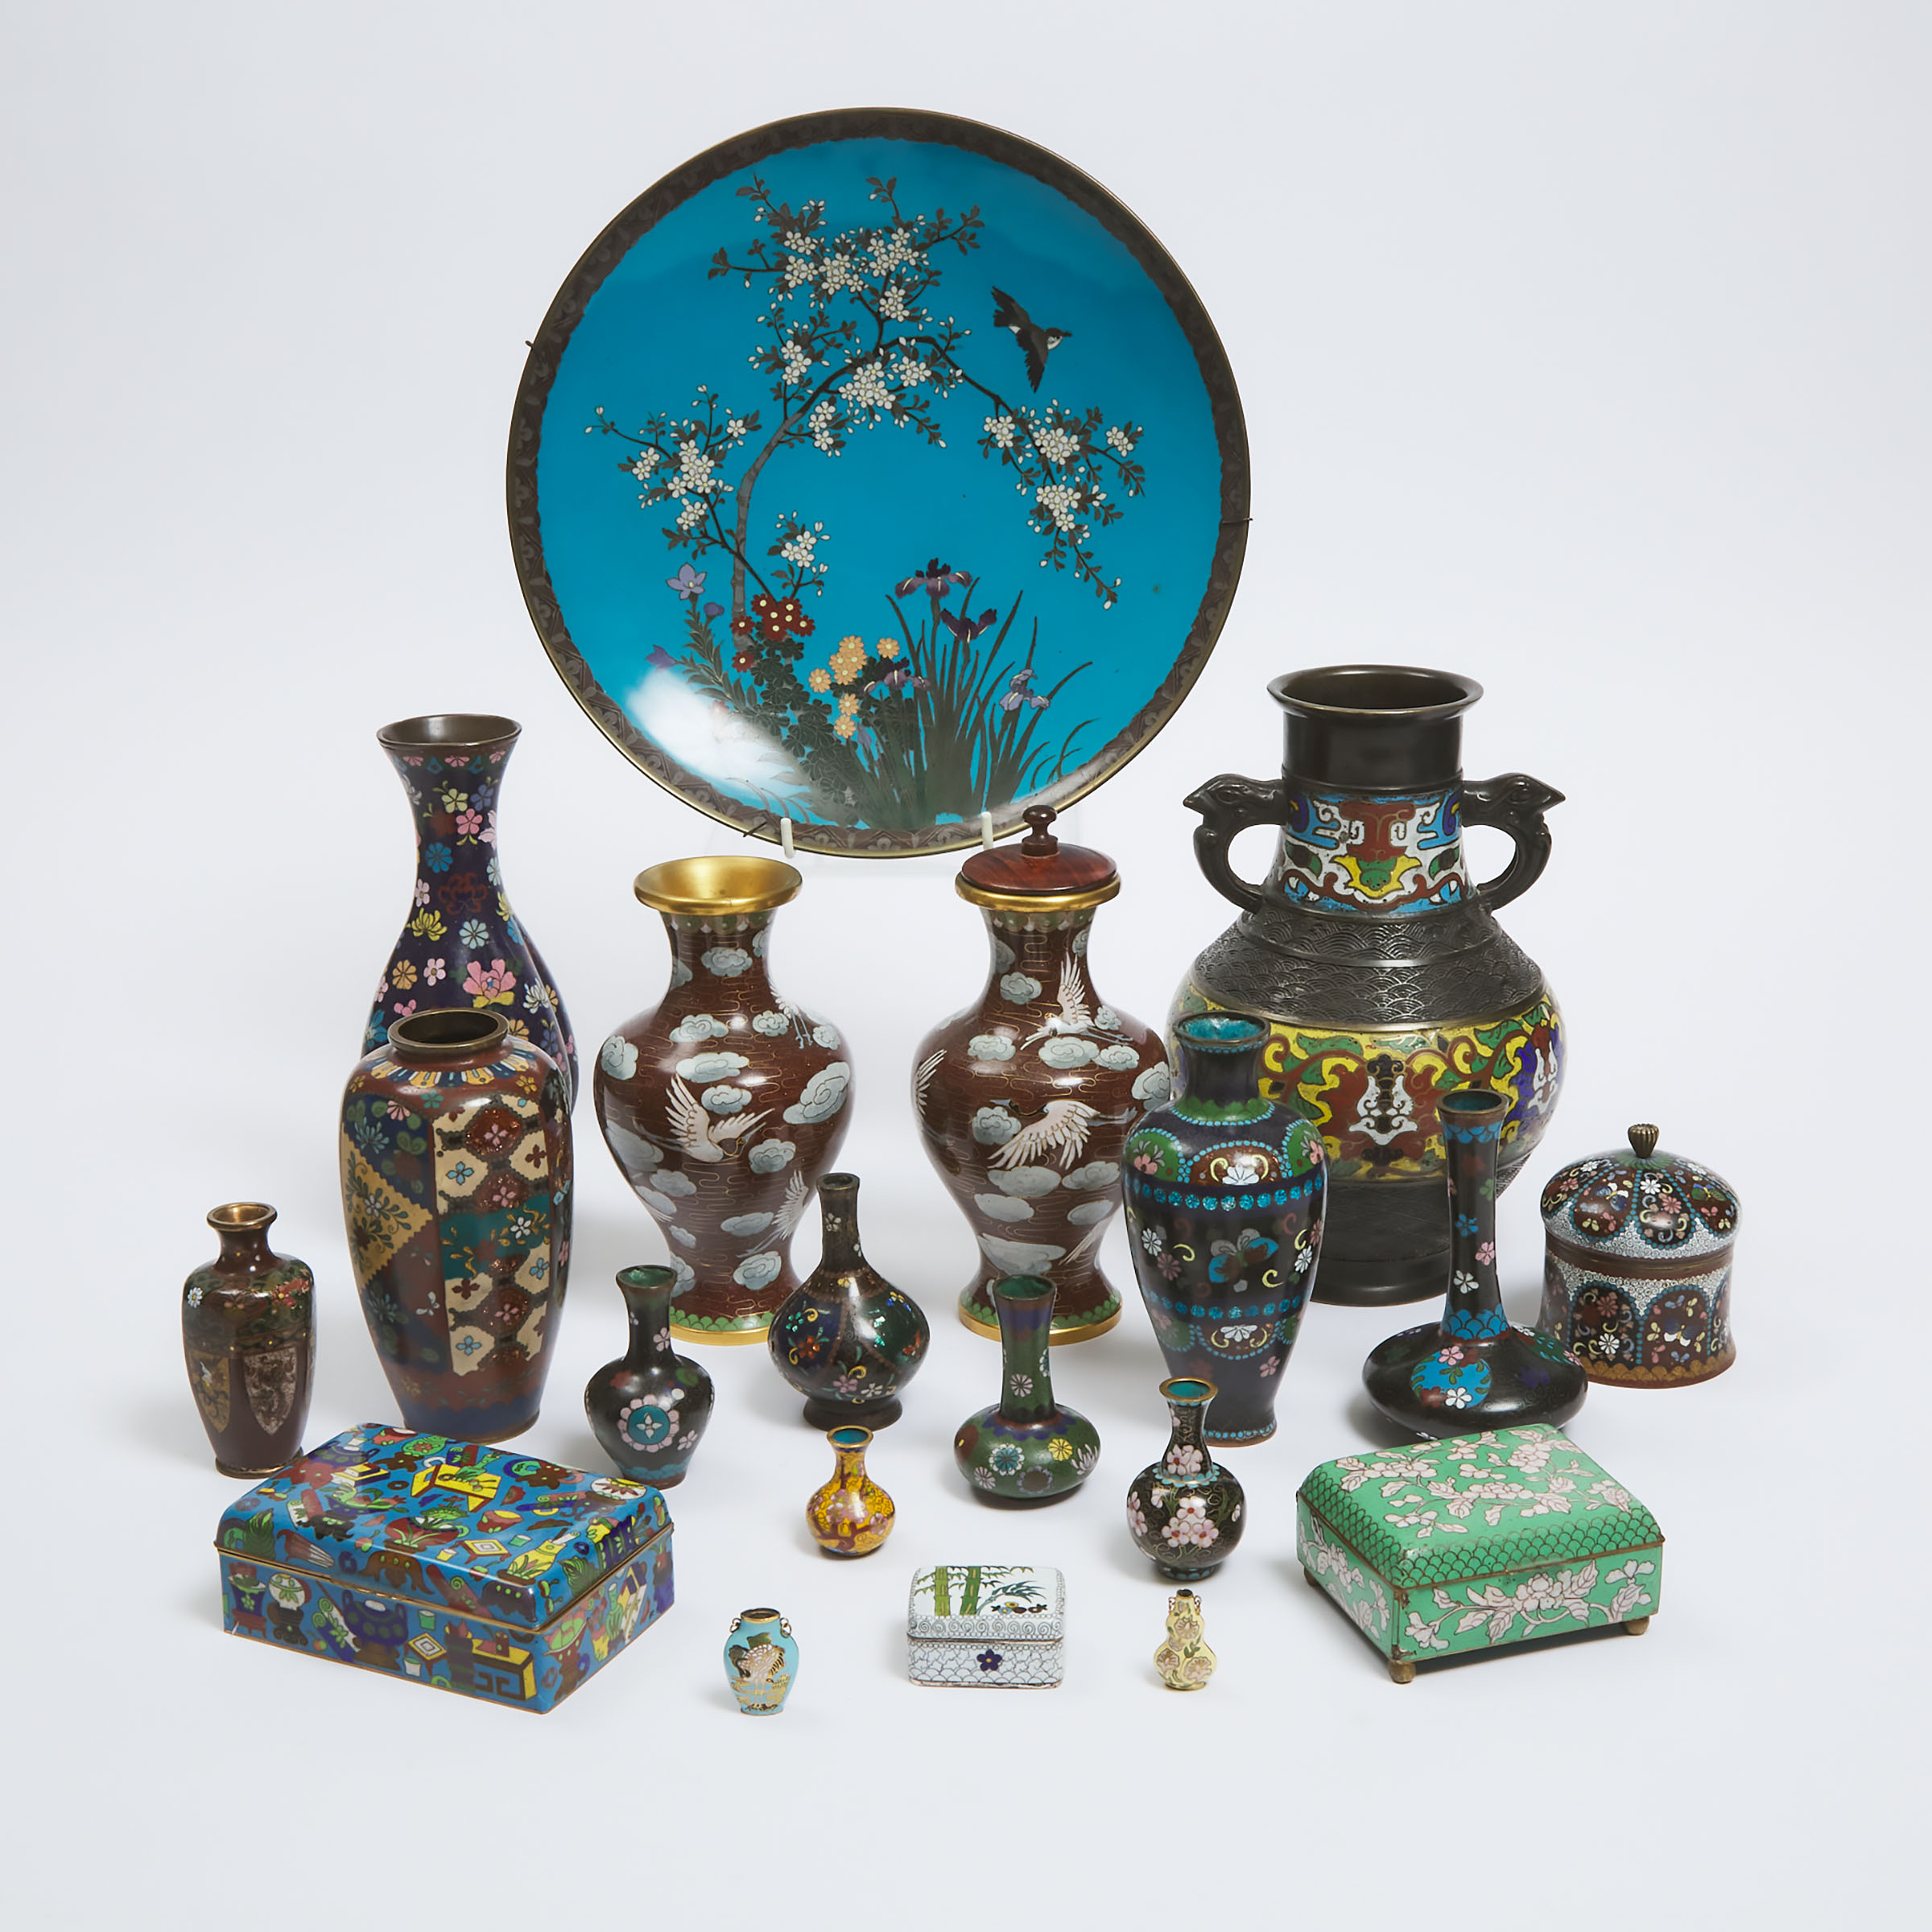 A Group of Twenty Cloisonné Vases and Wares, Early to Mid 20th Century